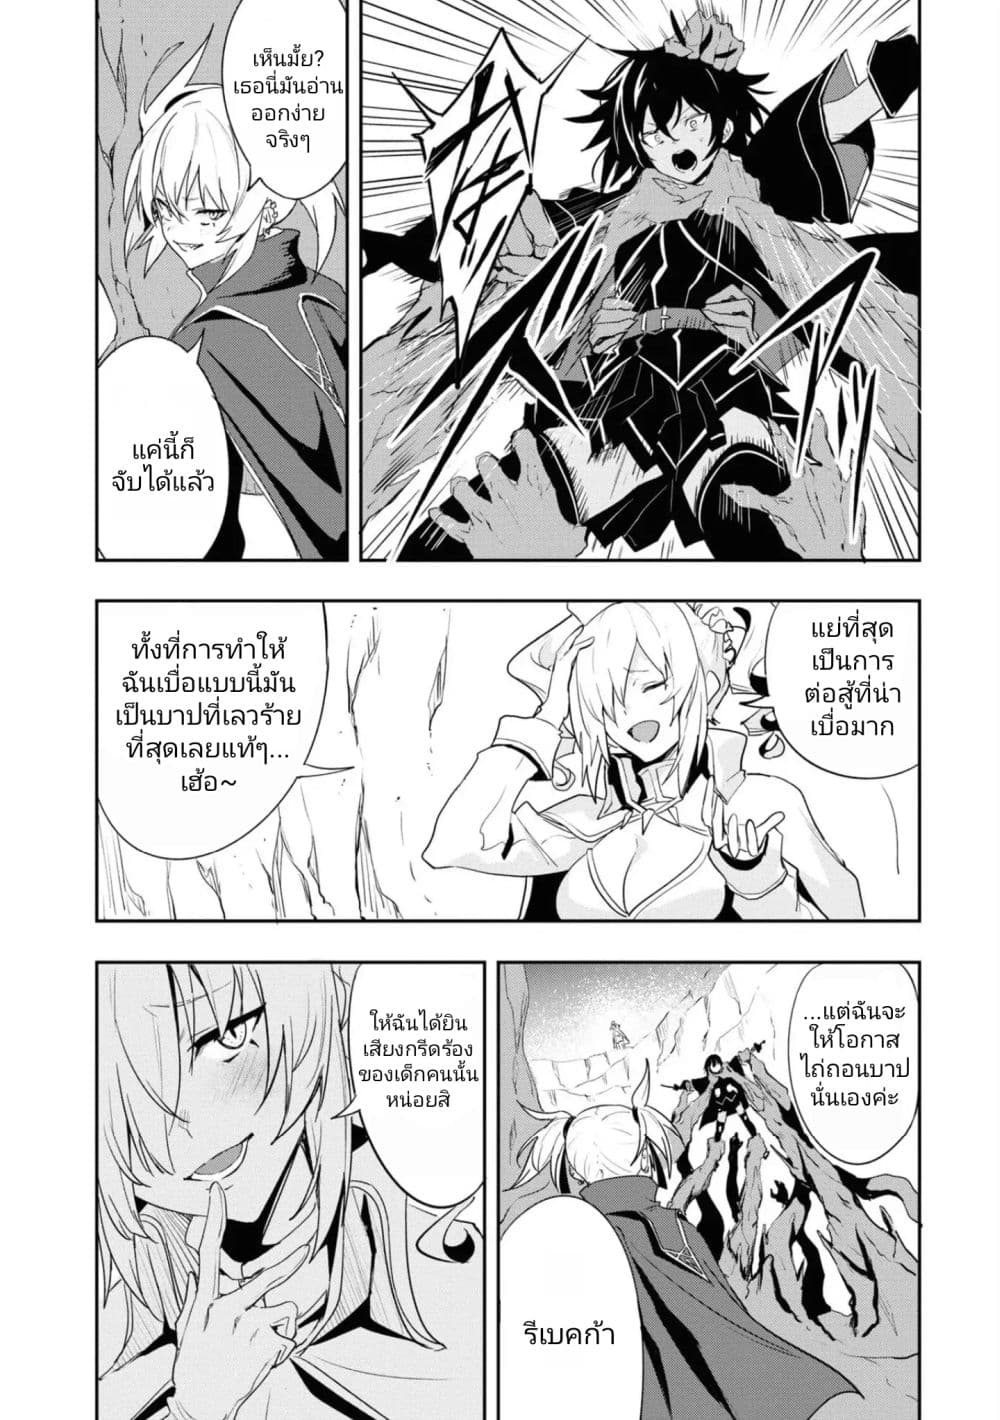 Witch Guild Fantasia 9 (15)